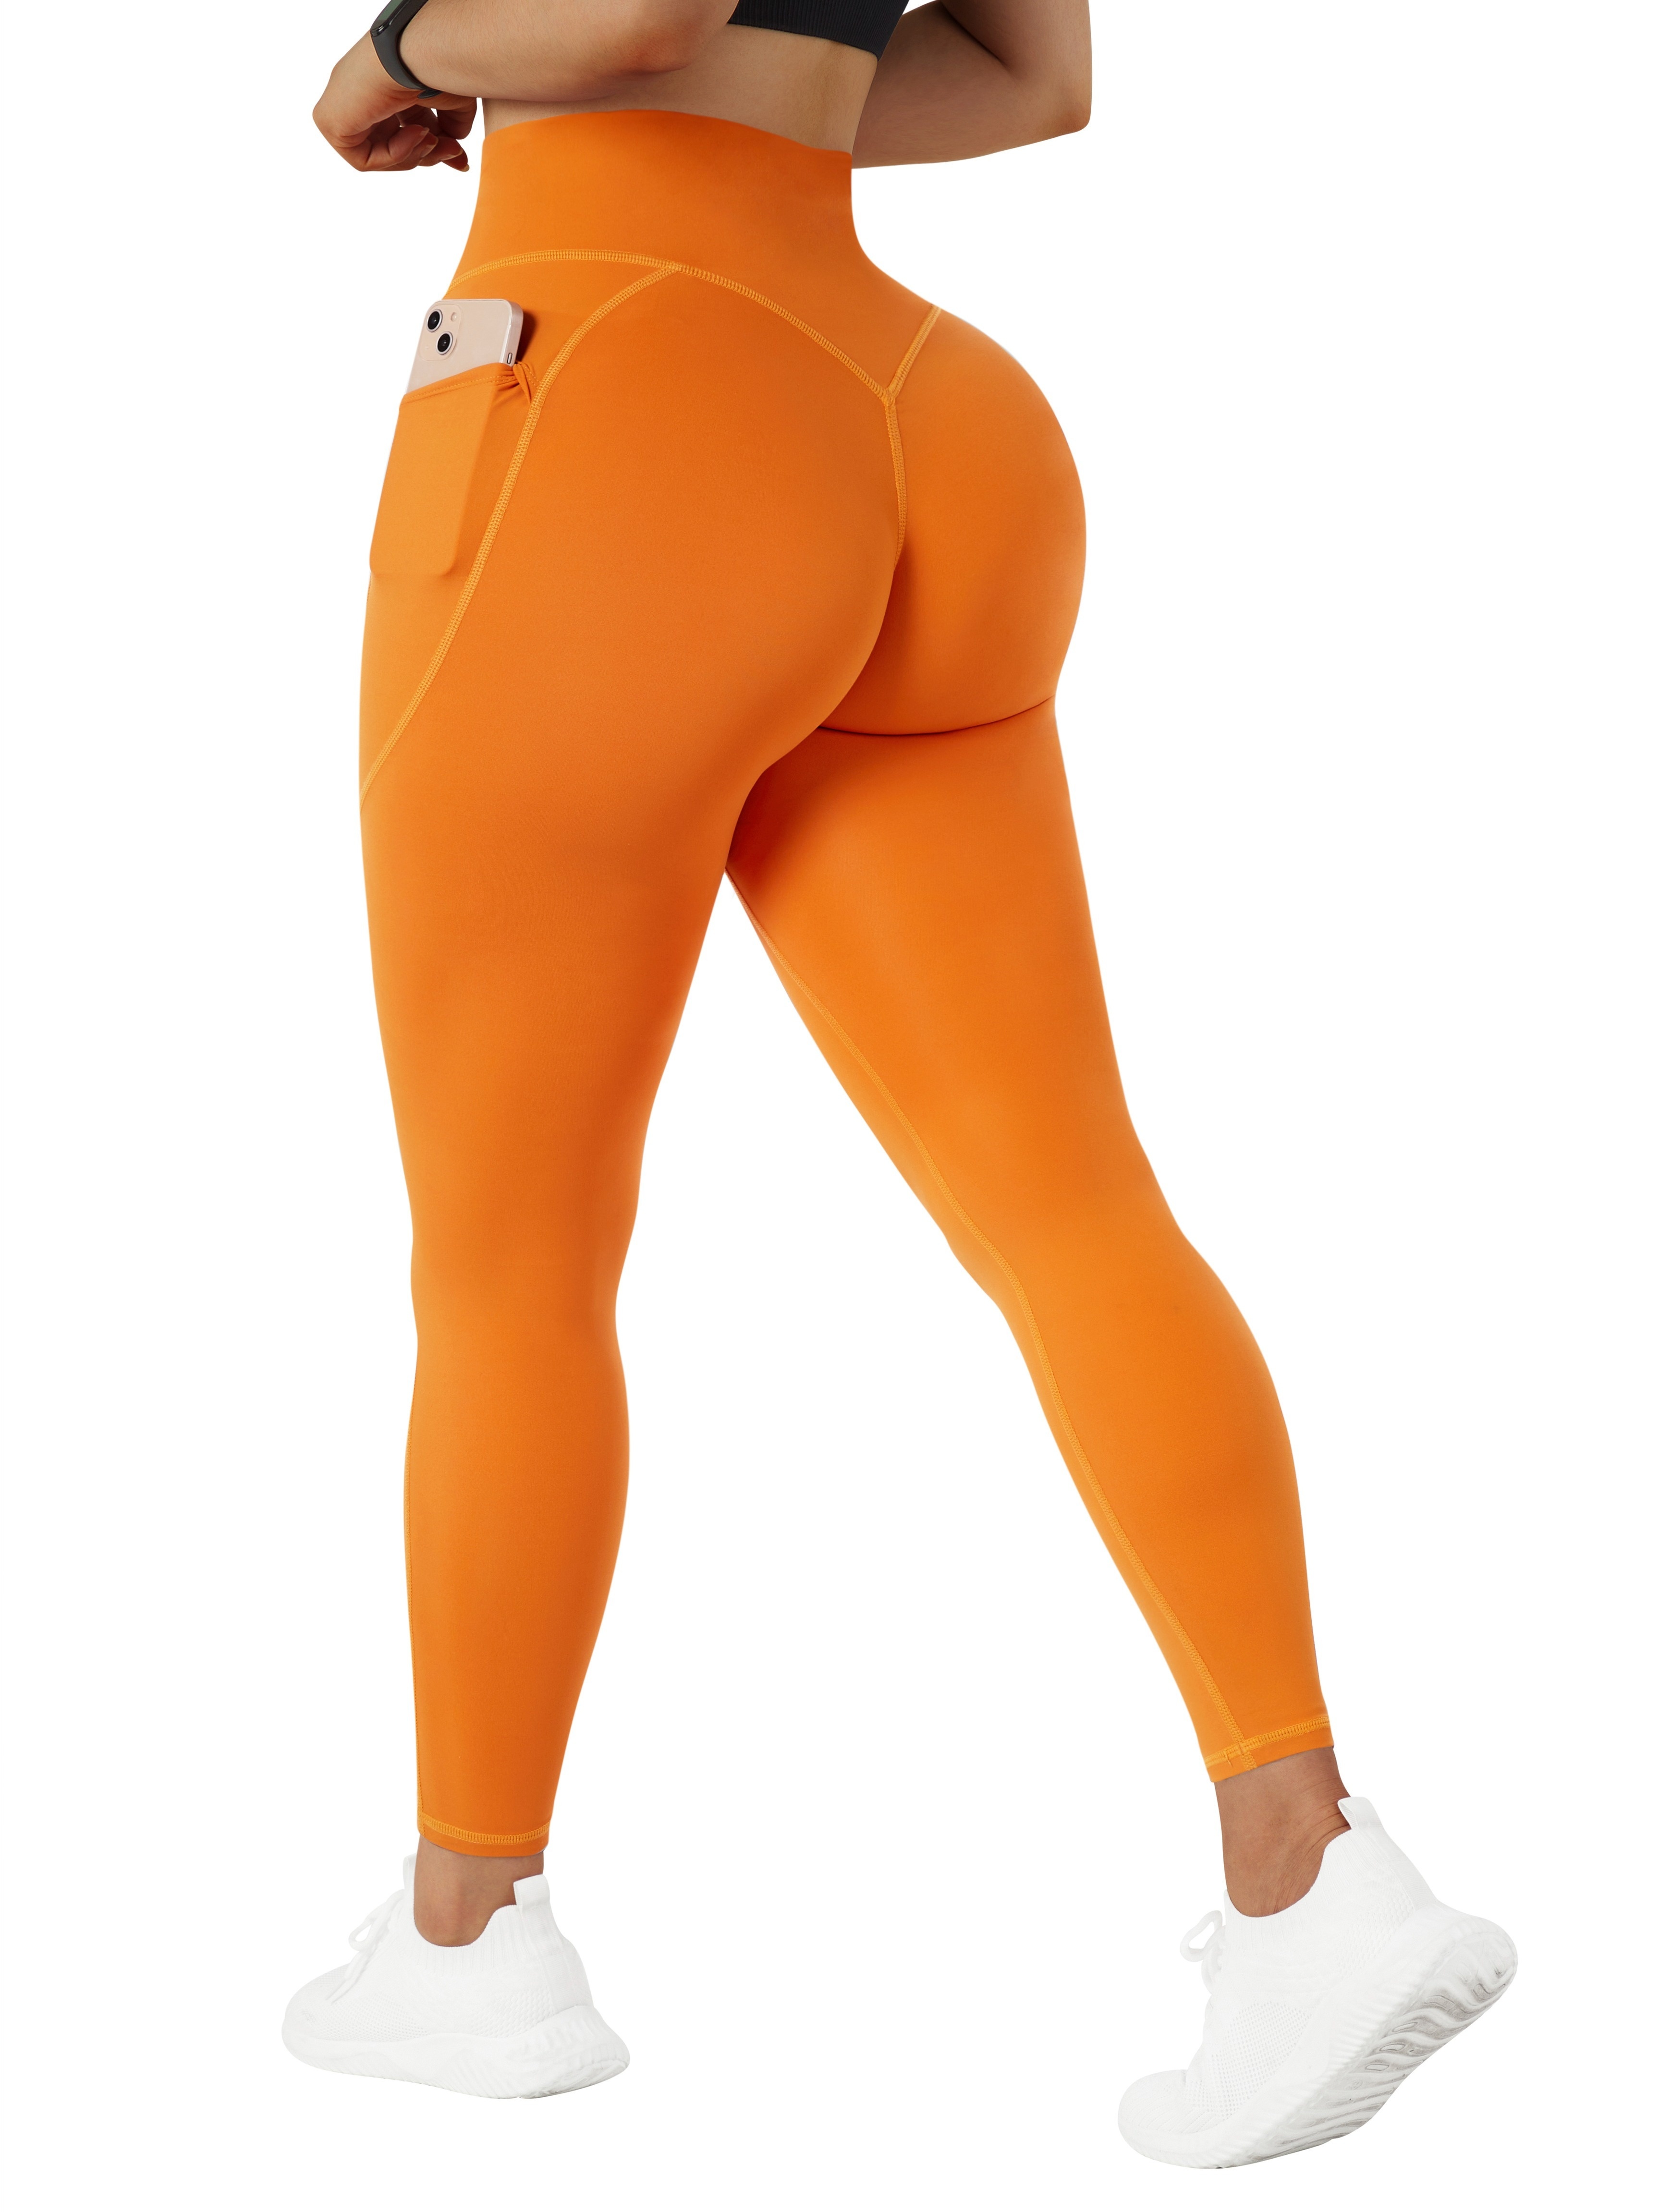 RQYYD Women Ribbed Seamless Leggings High Waisted Workout Gym Yoga Pants  Butt Lifting Tummy Control Tights Orange S